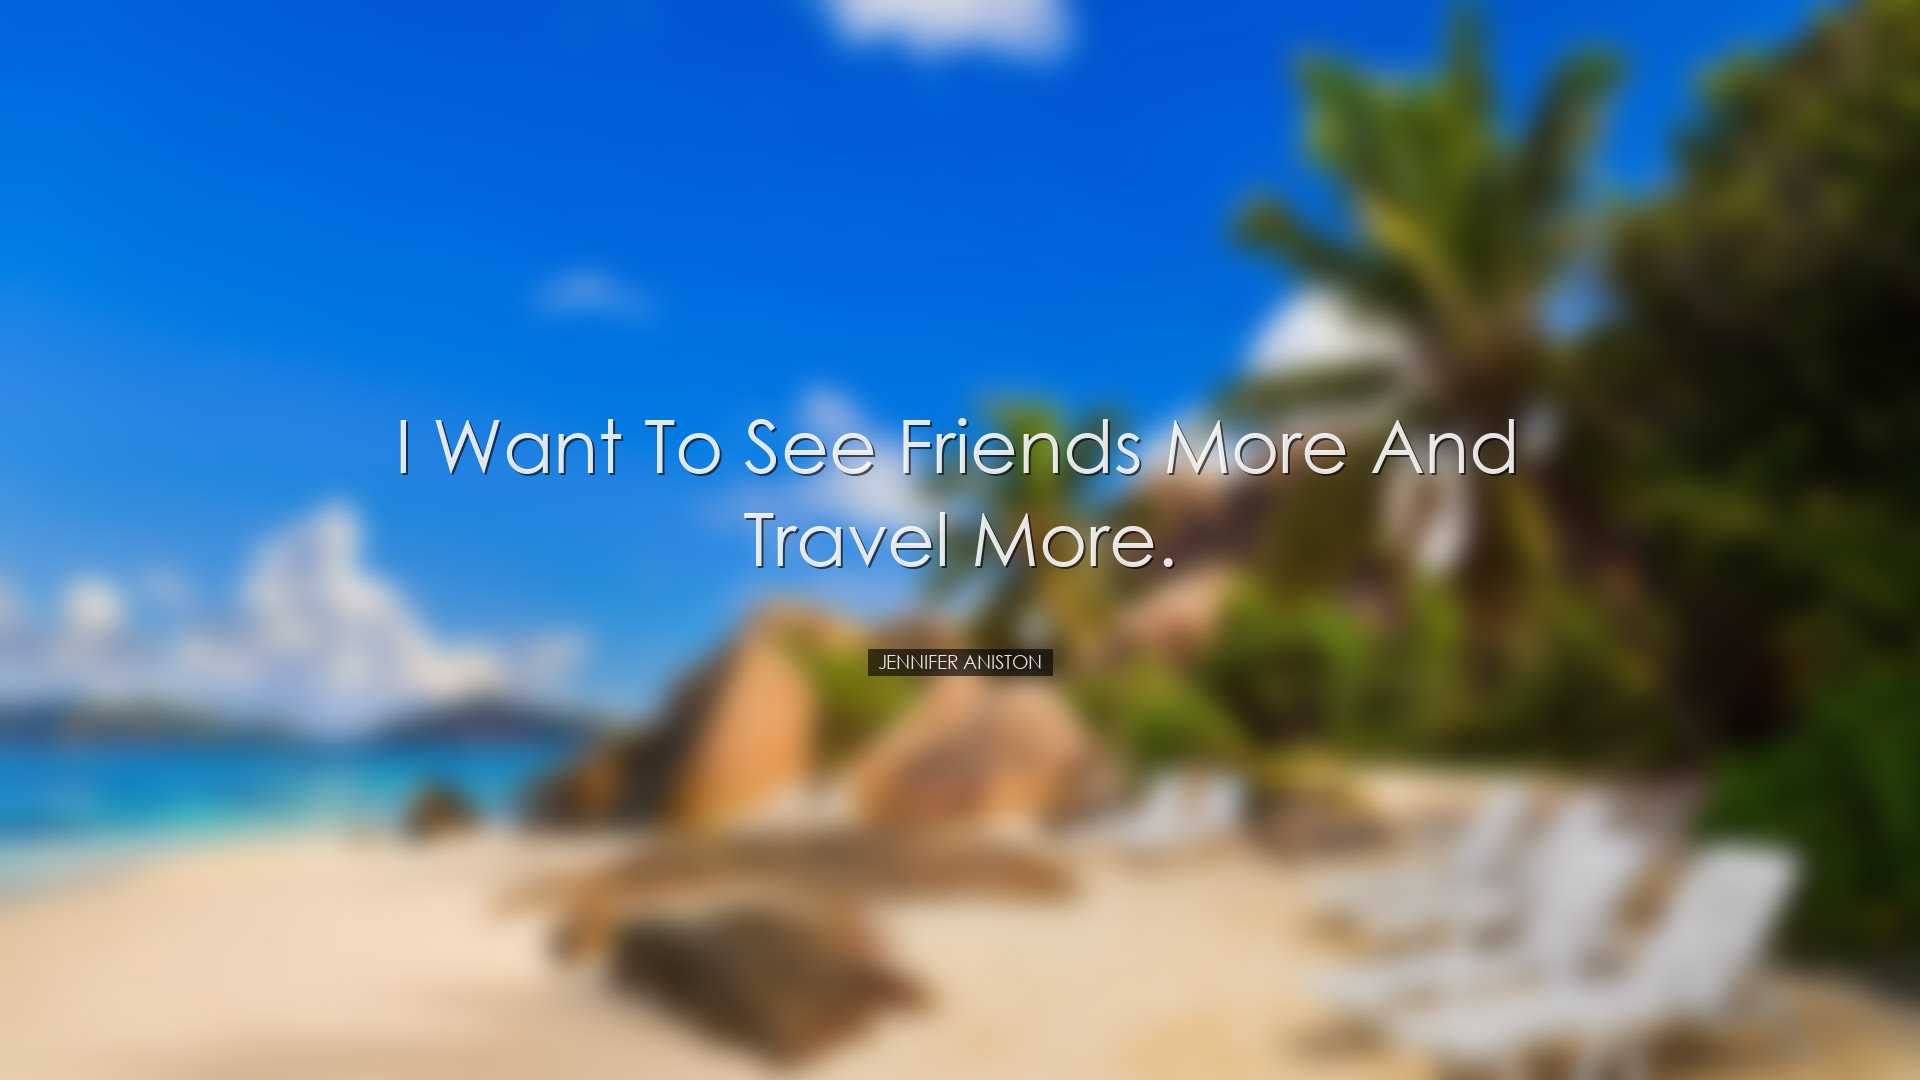 I want to see friends more and travel more. - Jennifer Aniston